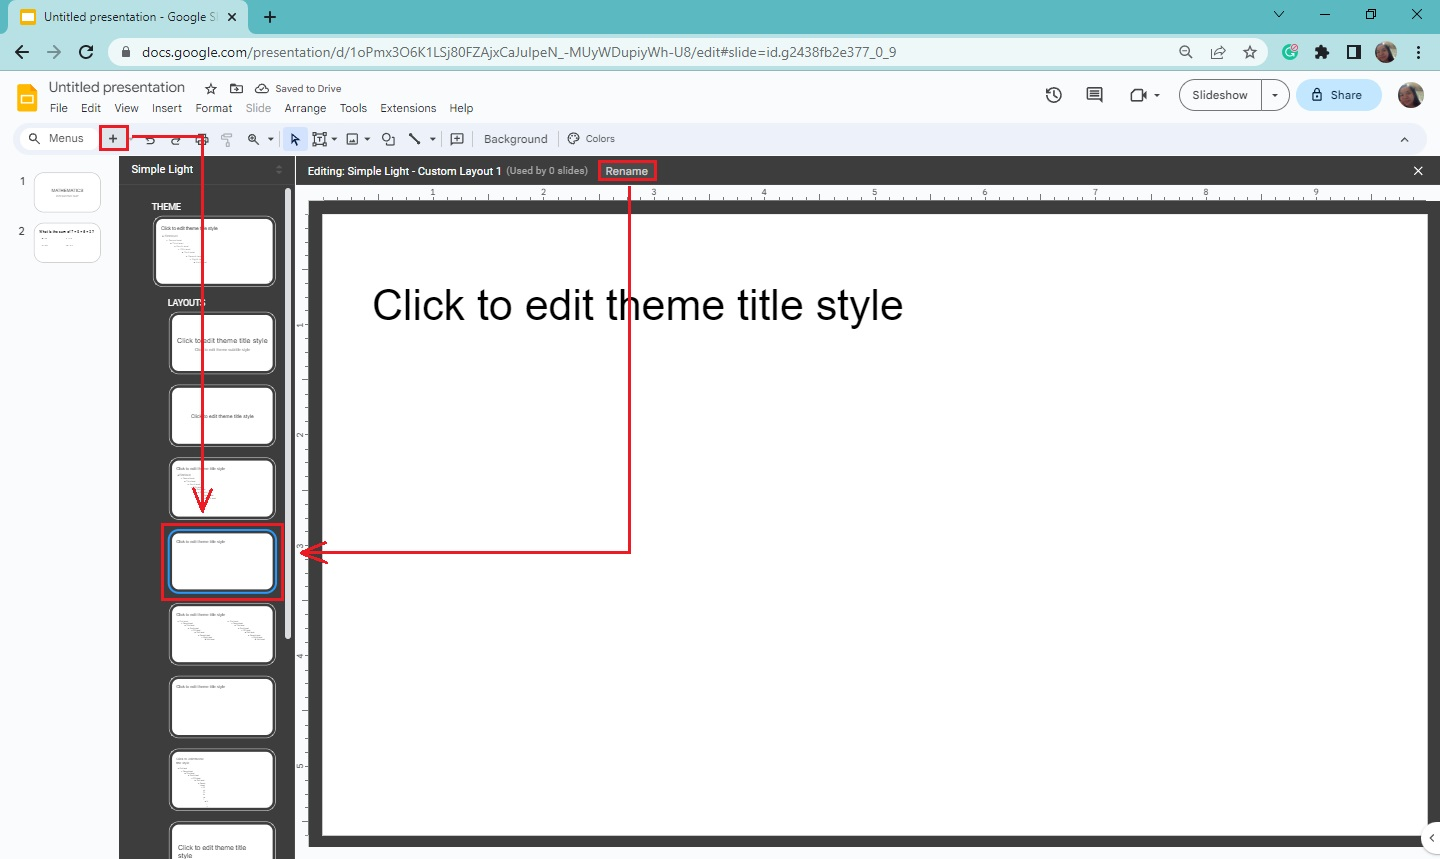 Then select "Rename" from the toolbar section of your "Theme Builder"